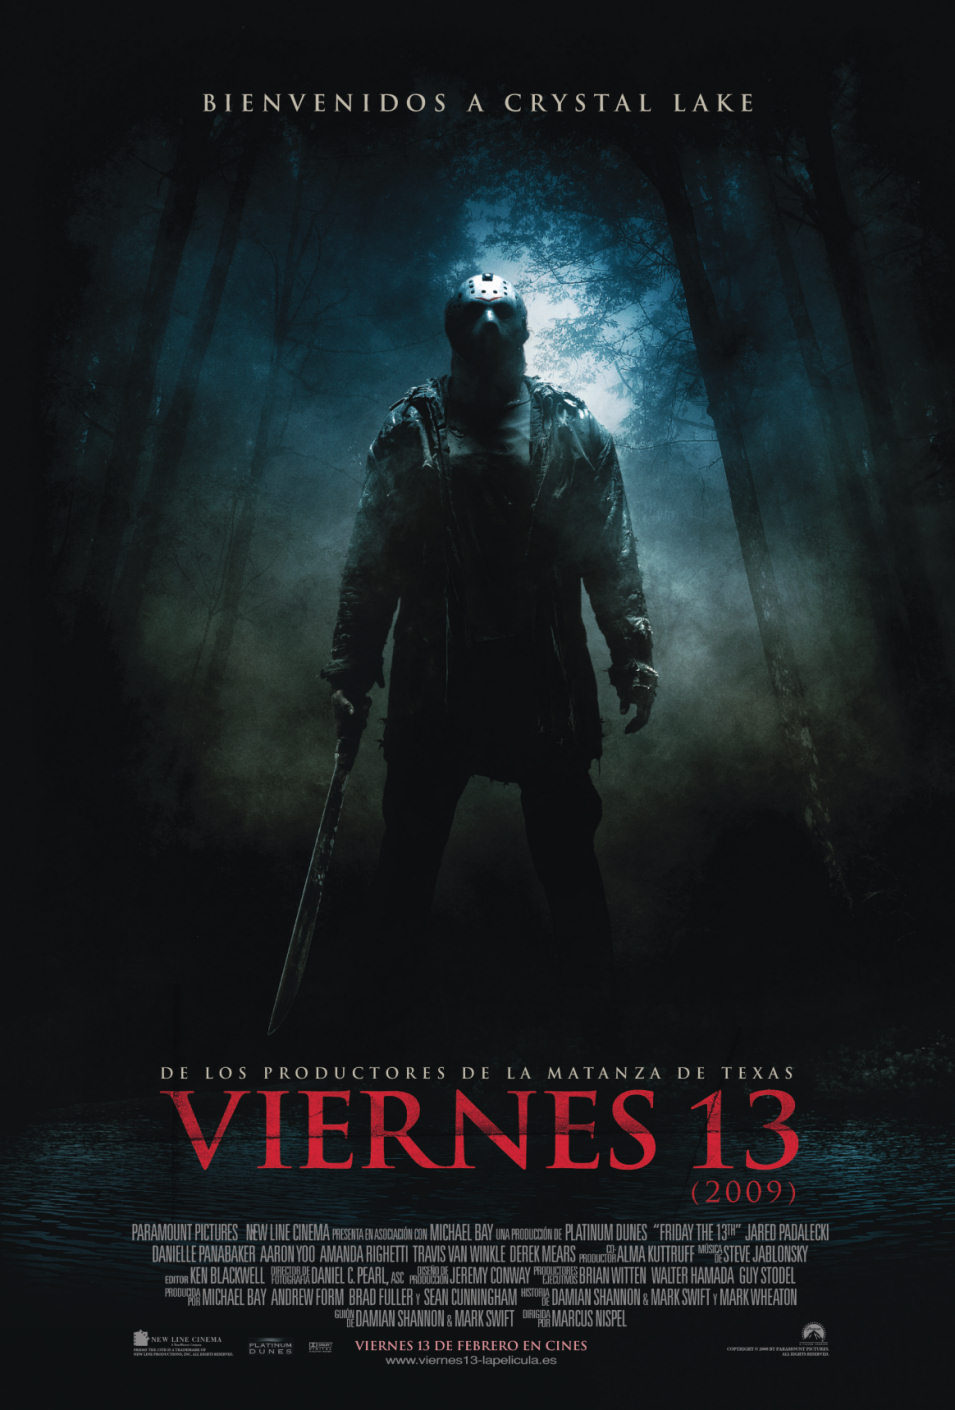 España poster for Friday the 13th